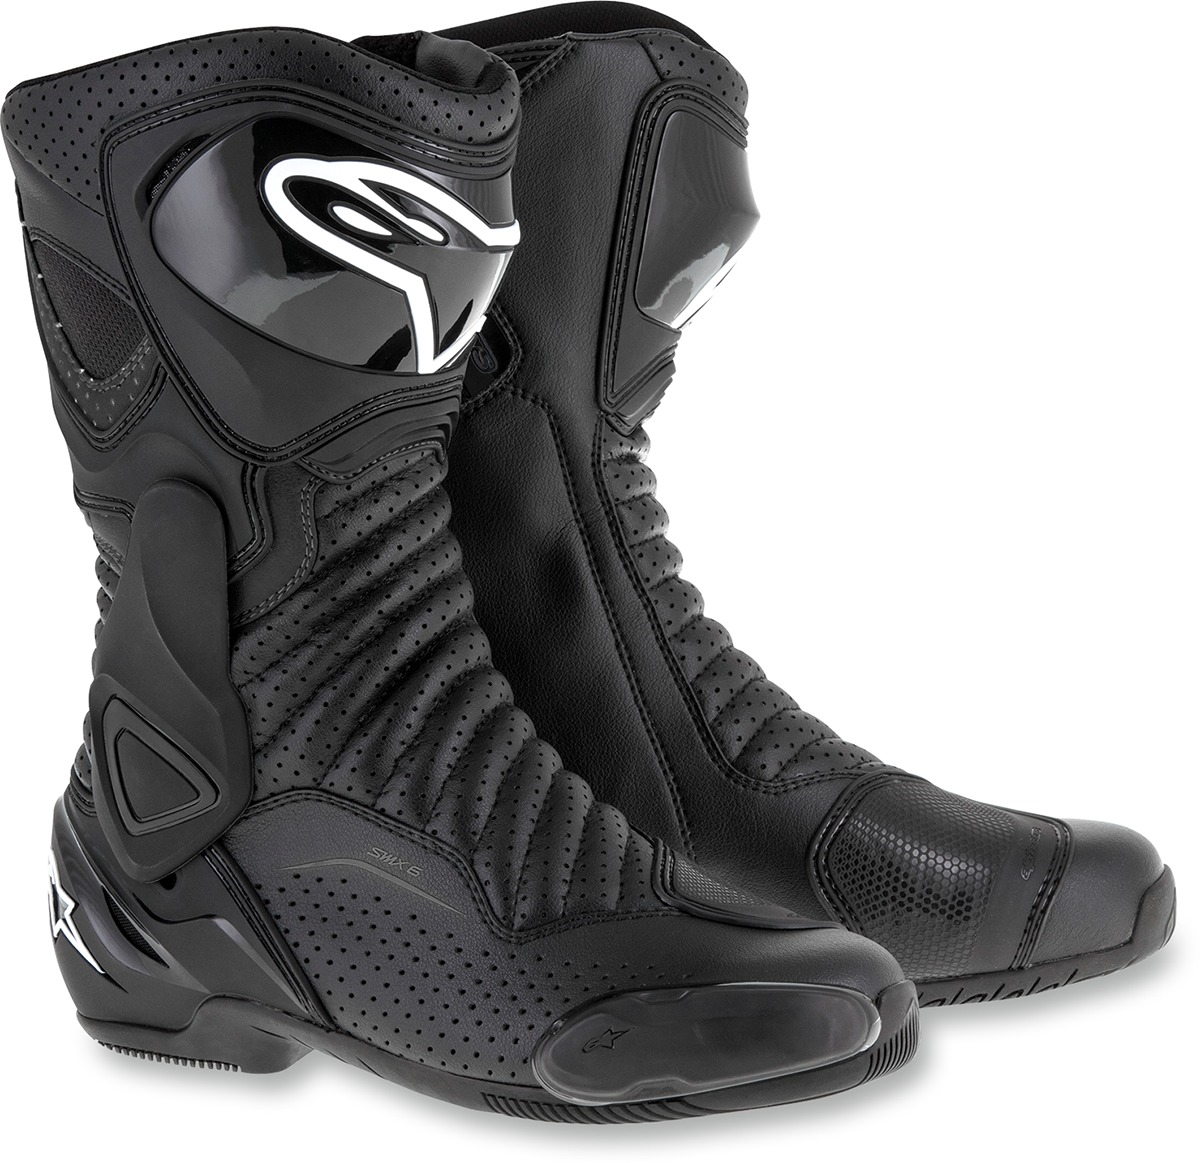 SMX-6v2 Vented Street Riding Boots Black US 11.5 - Click Image to Close